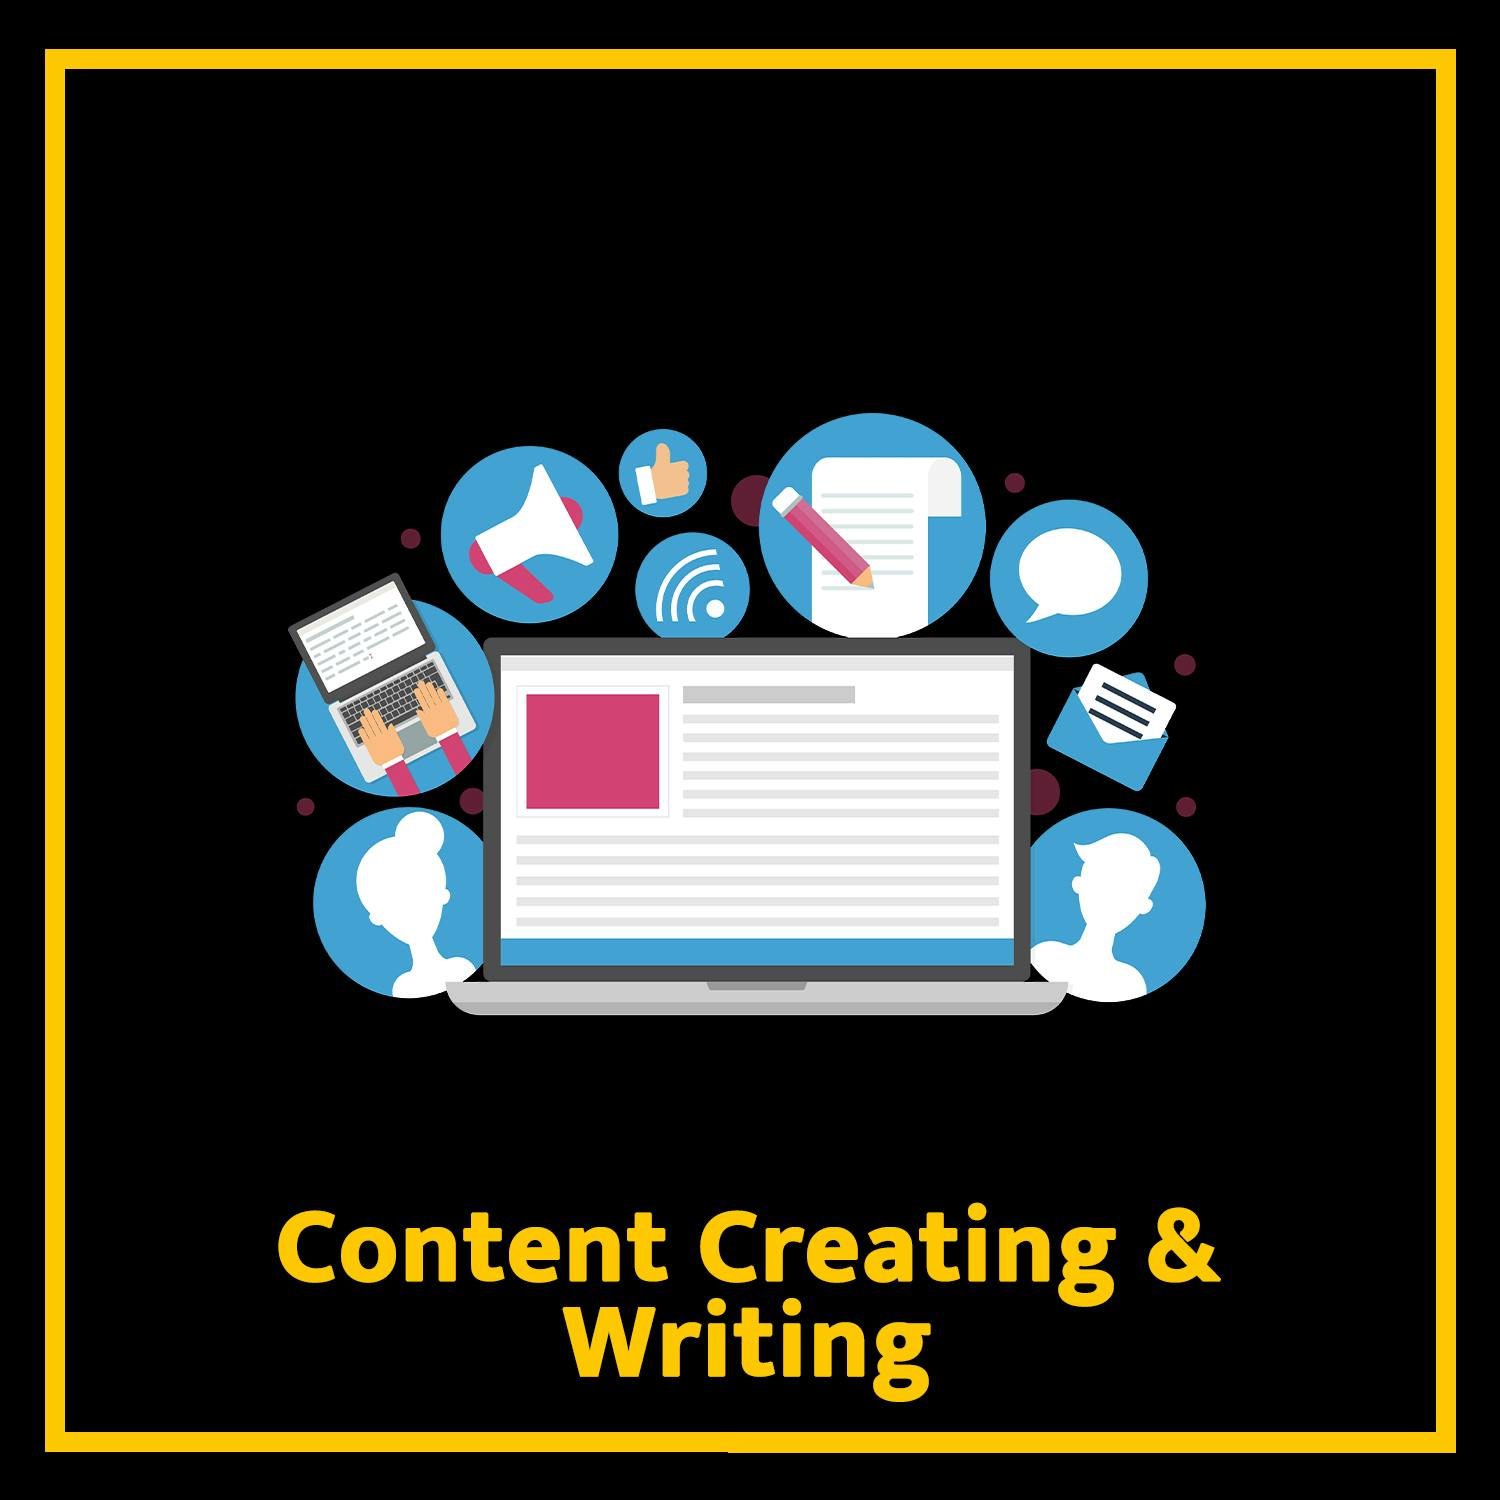 High Definition Content Creating & Writing